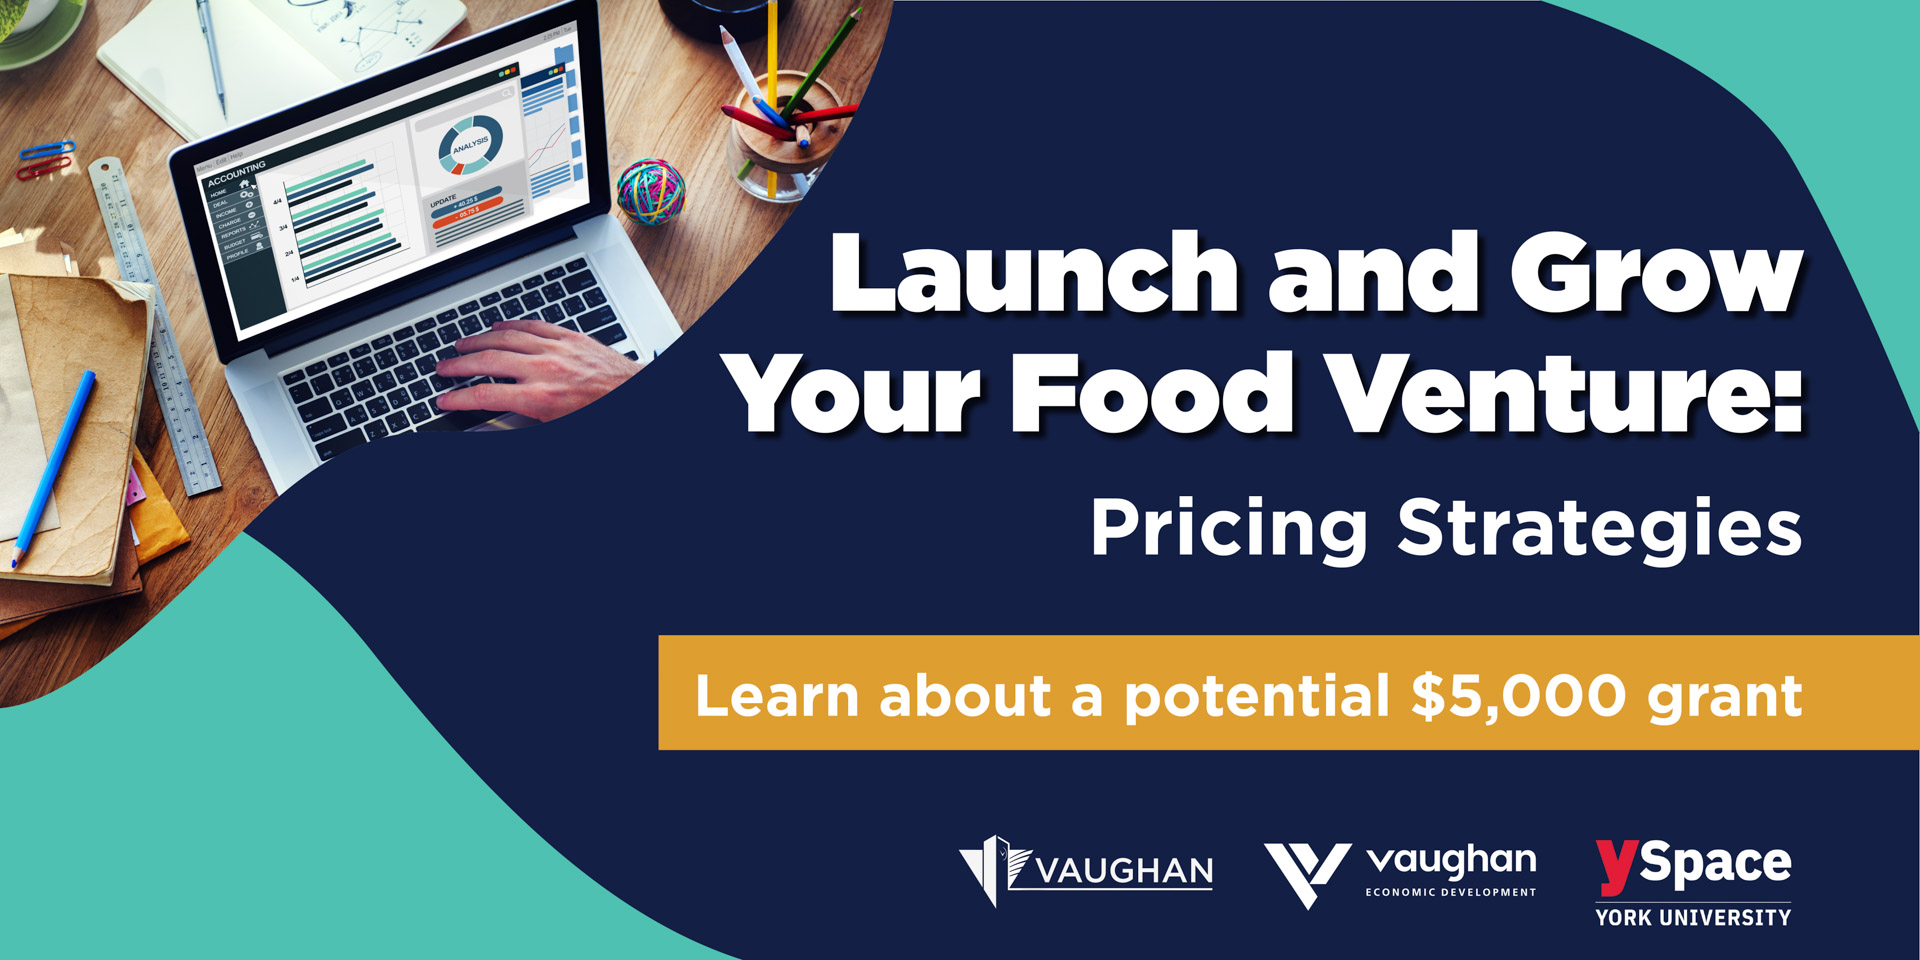 Launch and grow your food venture